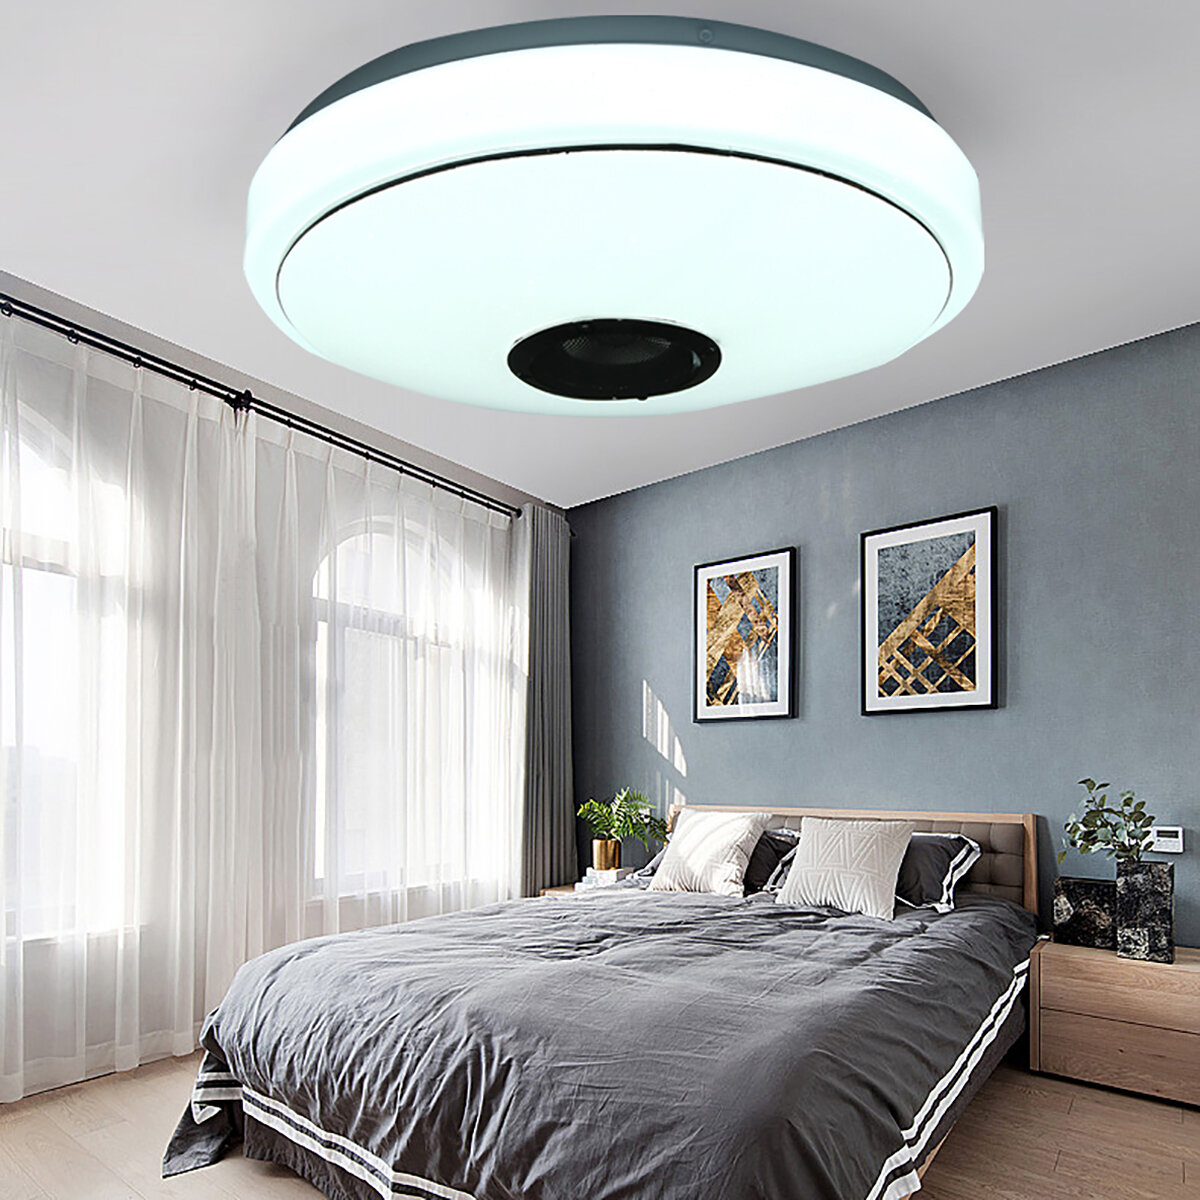 best price,33cm,36w,bluetooth,led,ceiling,light,coupon,price,discount